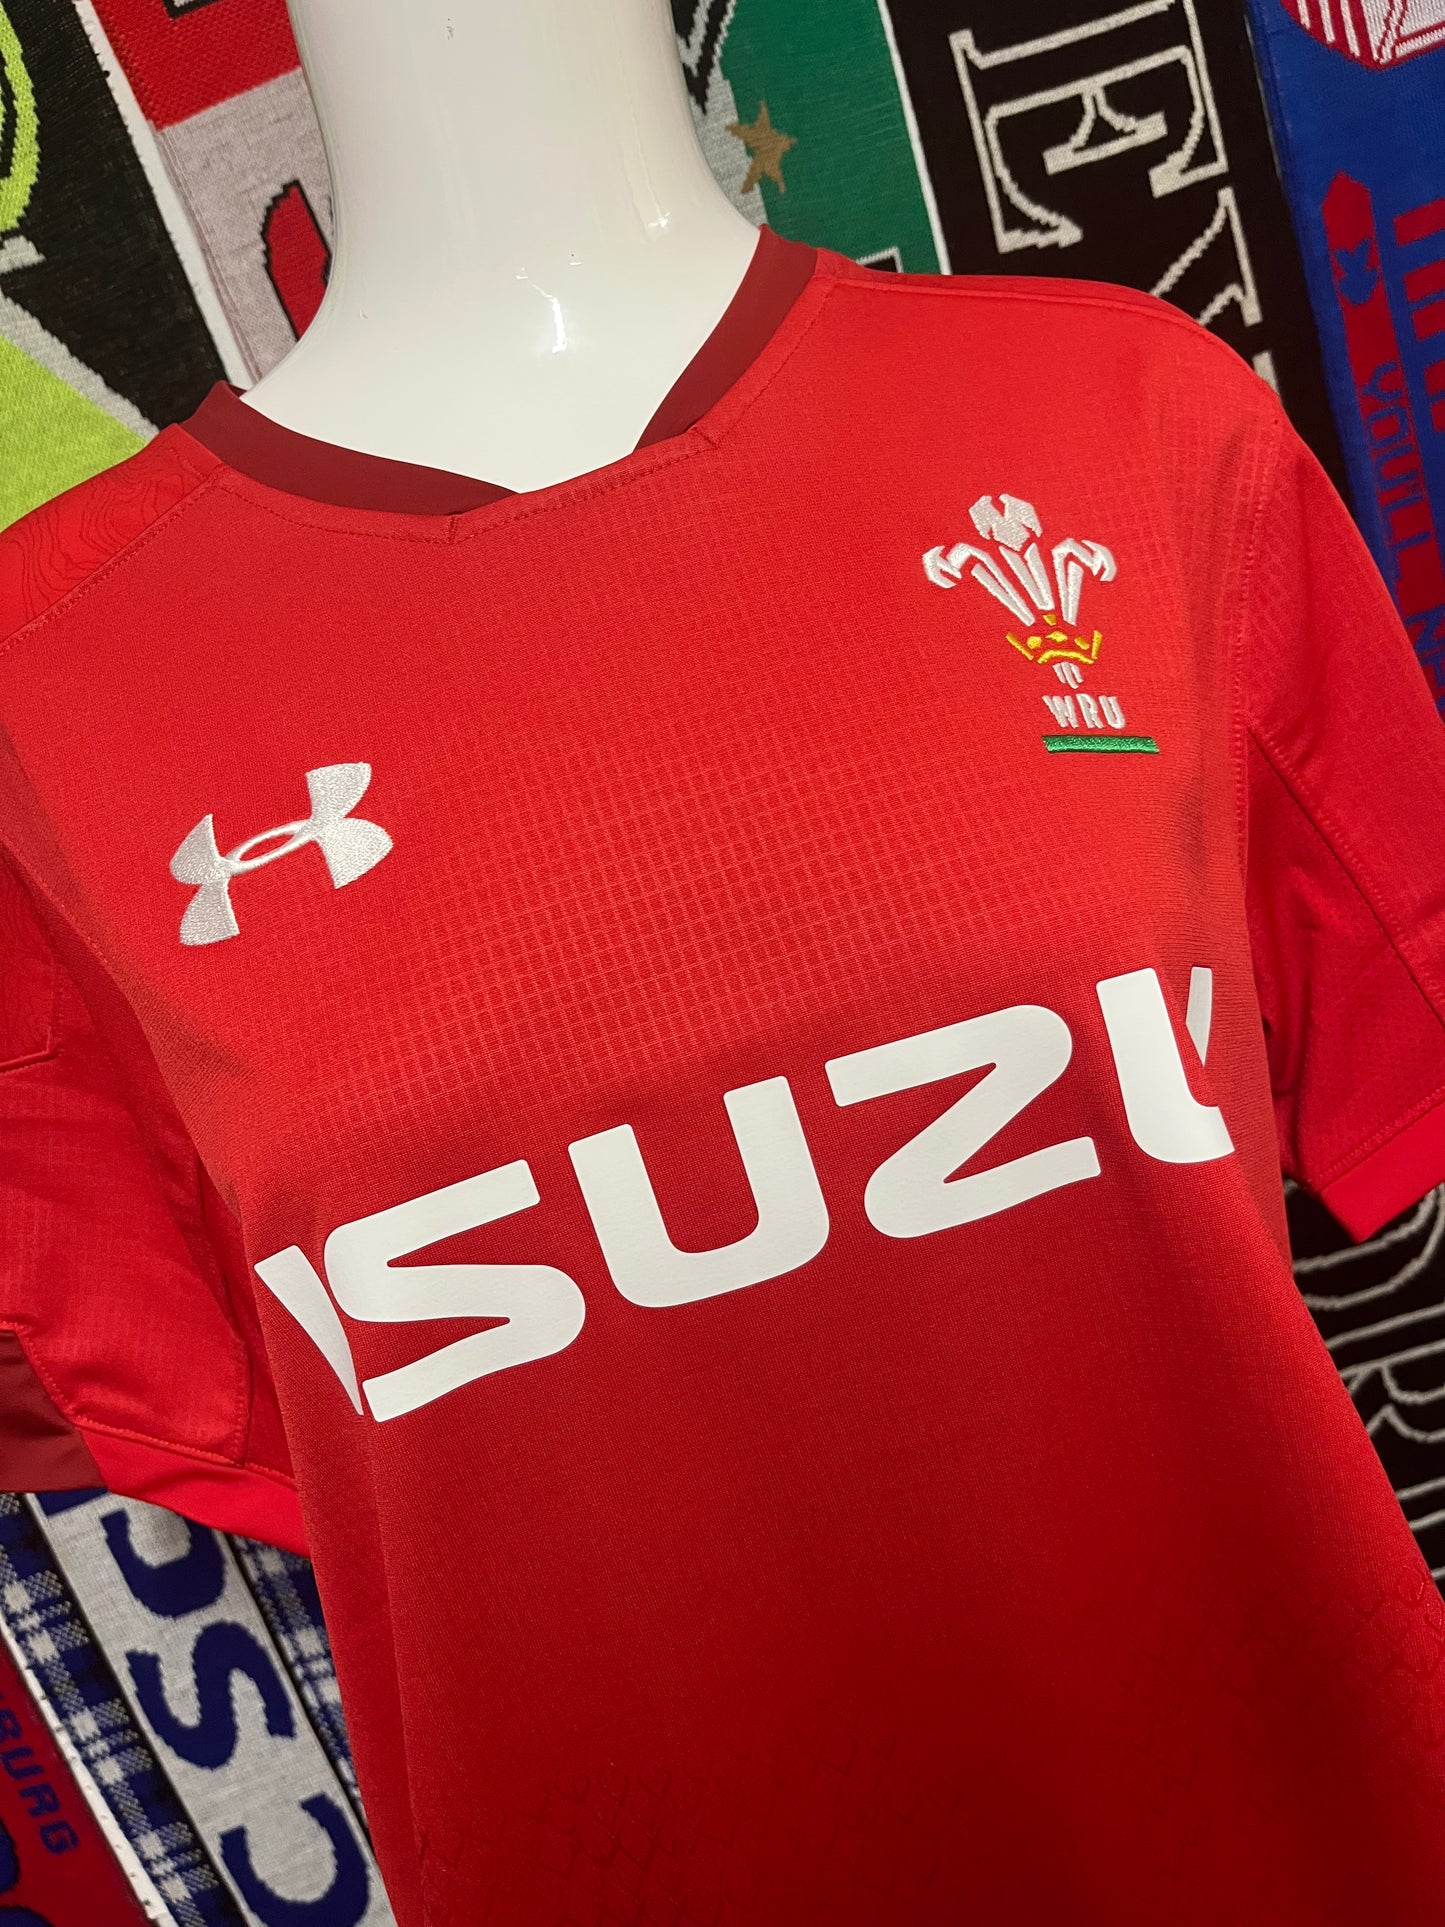 Wales Home 17/18 M